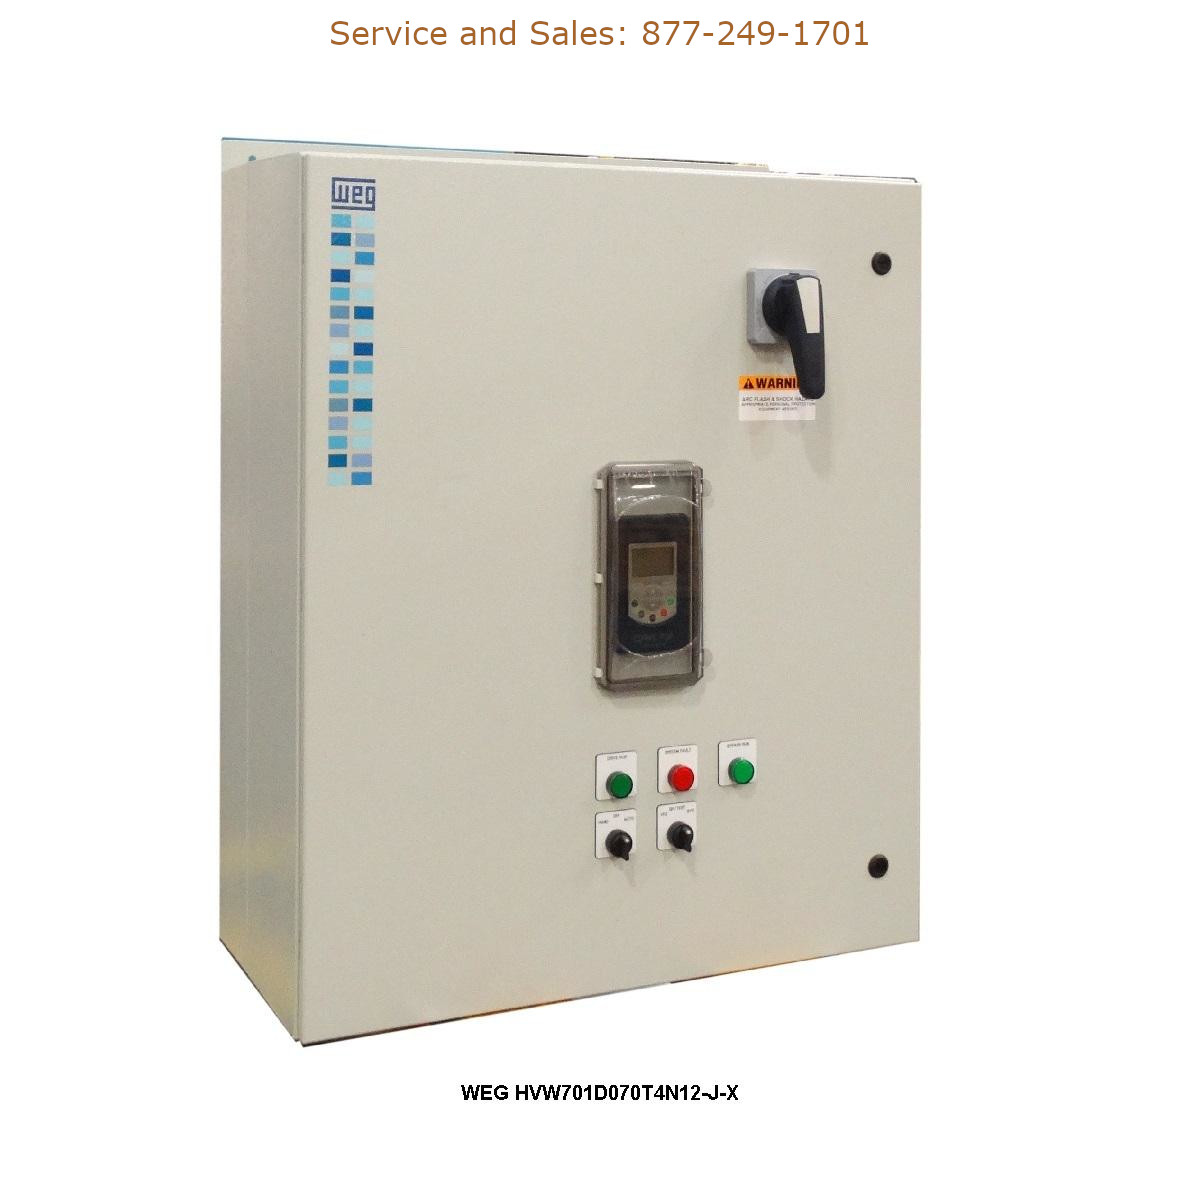 WEG HVW701D070T4N12-J-X WEG Model Number HVW701D070T4N12-J-X WEG Drives, Variable Speed Drives Repair Service, Troubleshooting, Replacement Parts https://gesrepair.com/wp-content/uploads/2022/WEG/WEG_HVW701D070T4N12-J-X_Drives_Variable_Speed_Drives.jpg